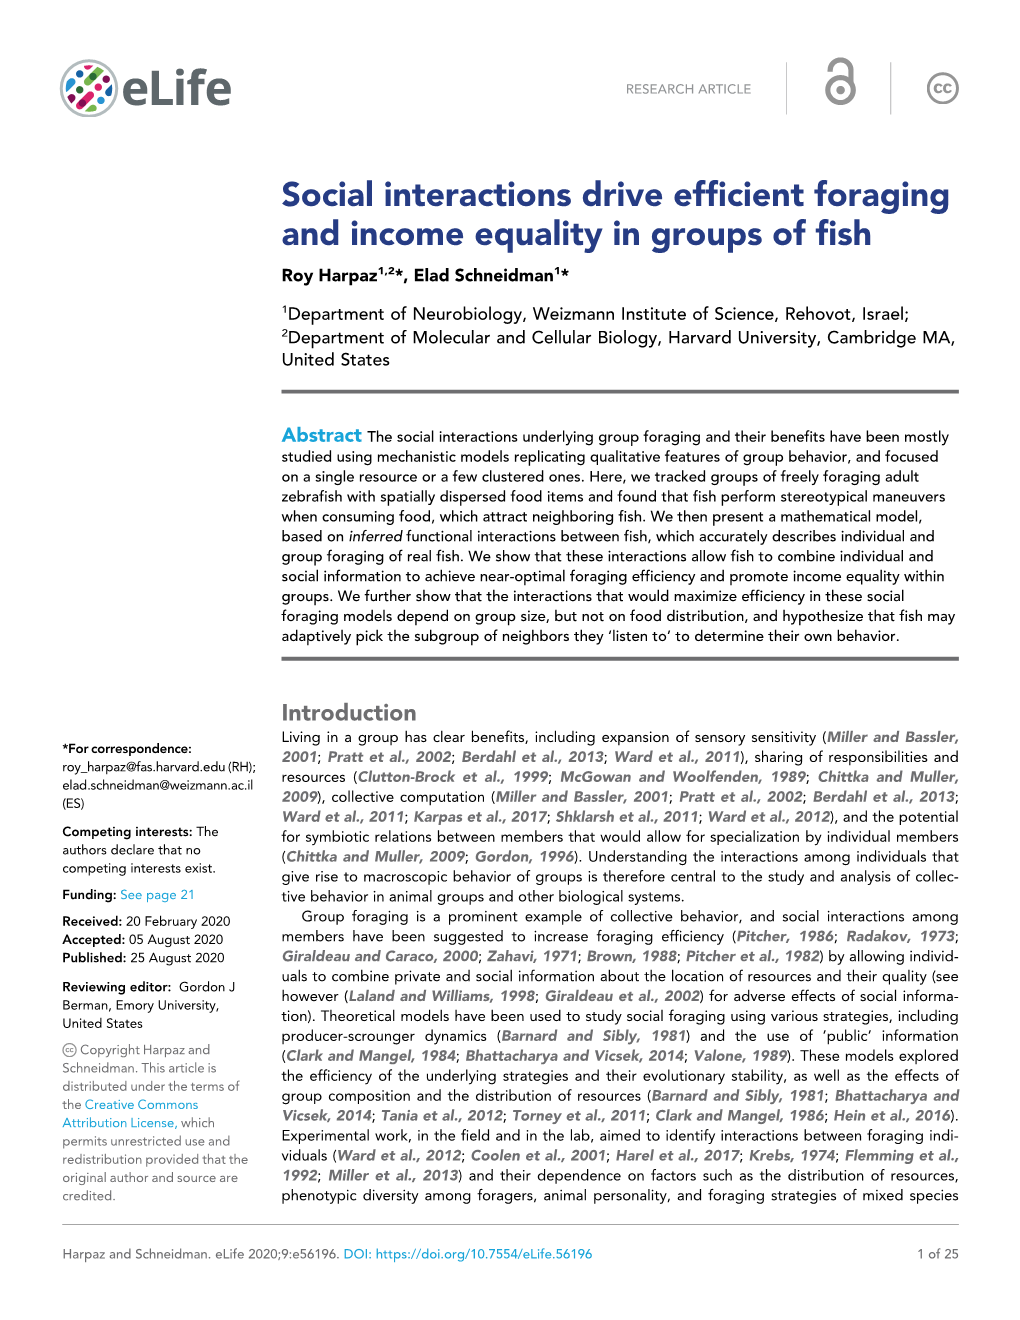 Social Interactions Drive Efficient Foraging and Income Equality in Groups of Fish Roy Harpaz1,2*, Elad Schneidman1*